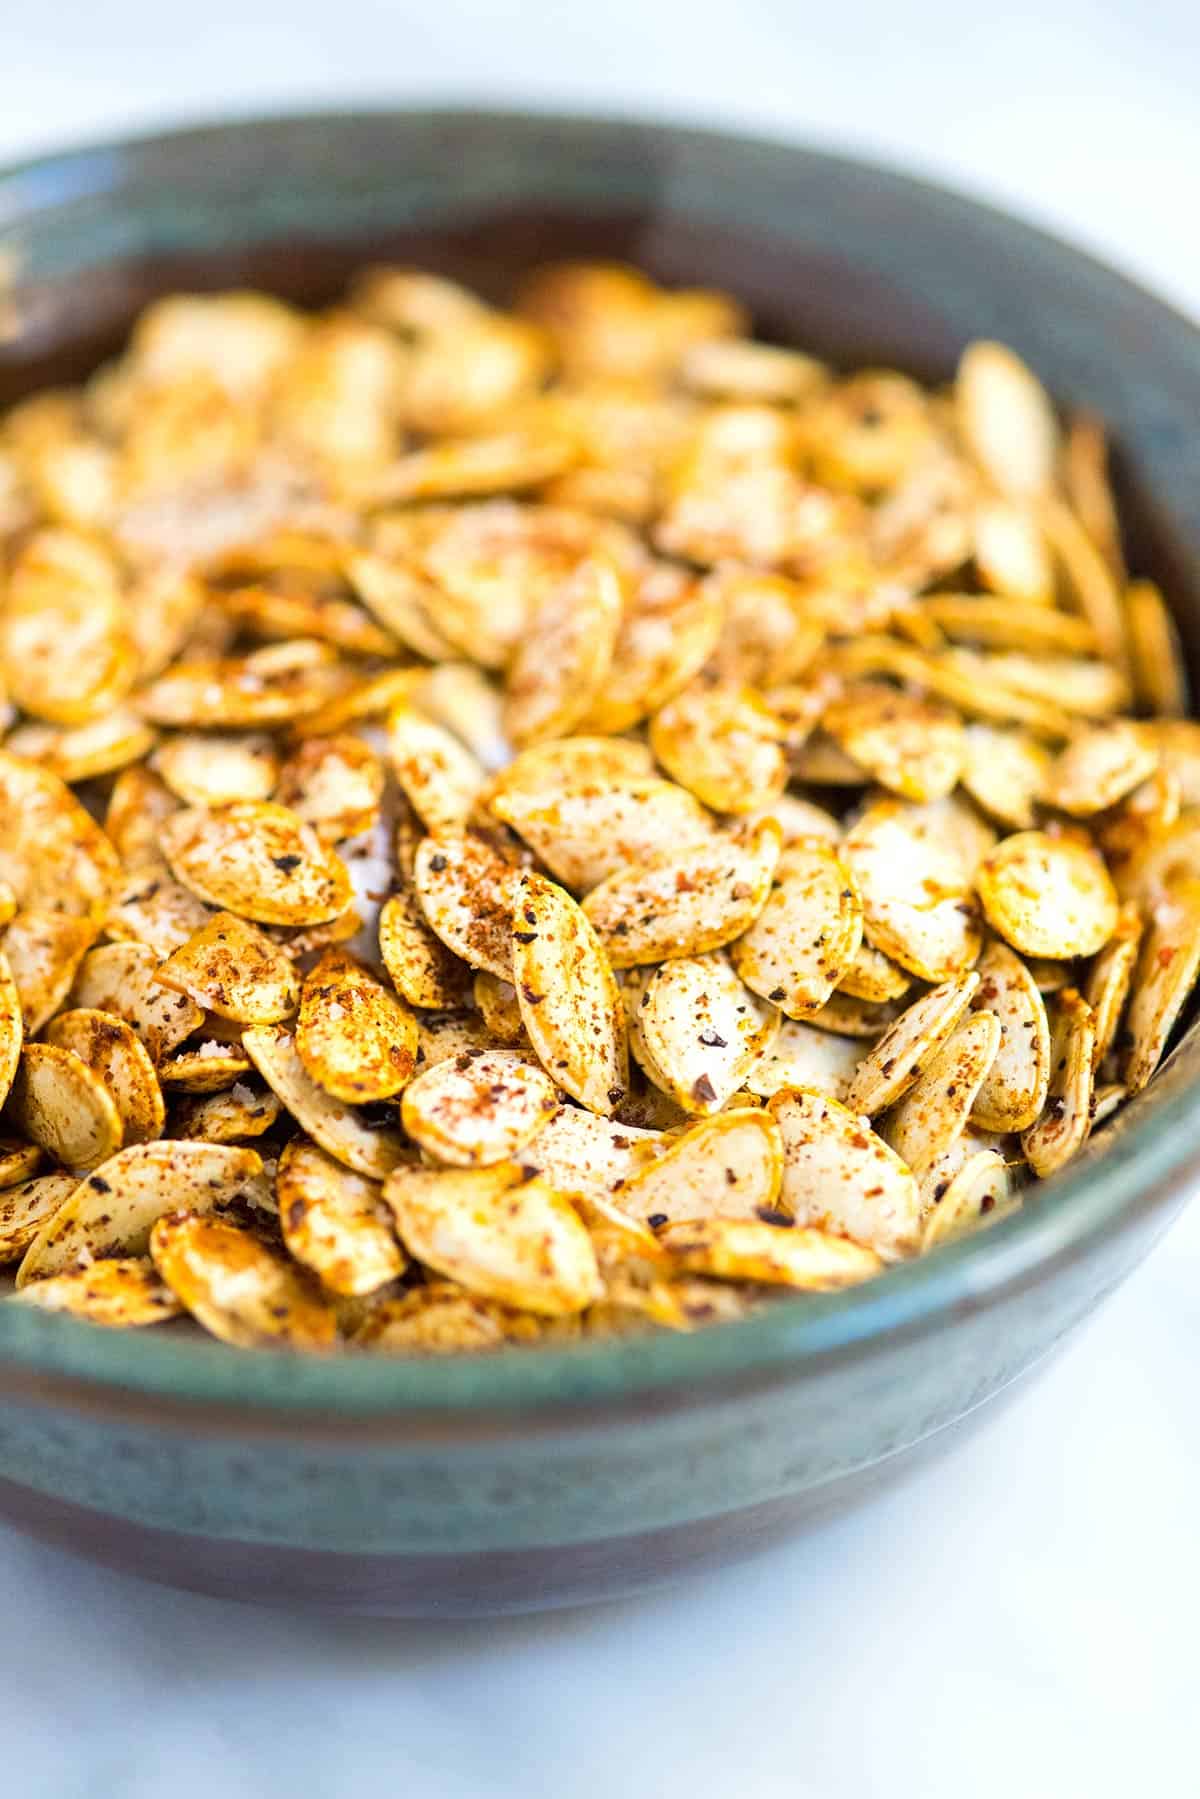 Roasted pumpkin seeds with spices